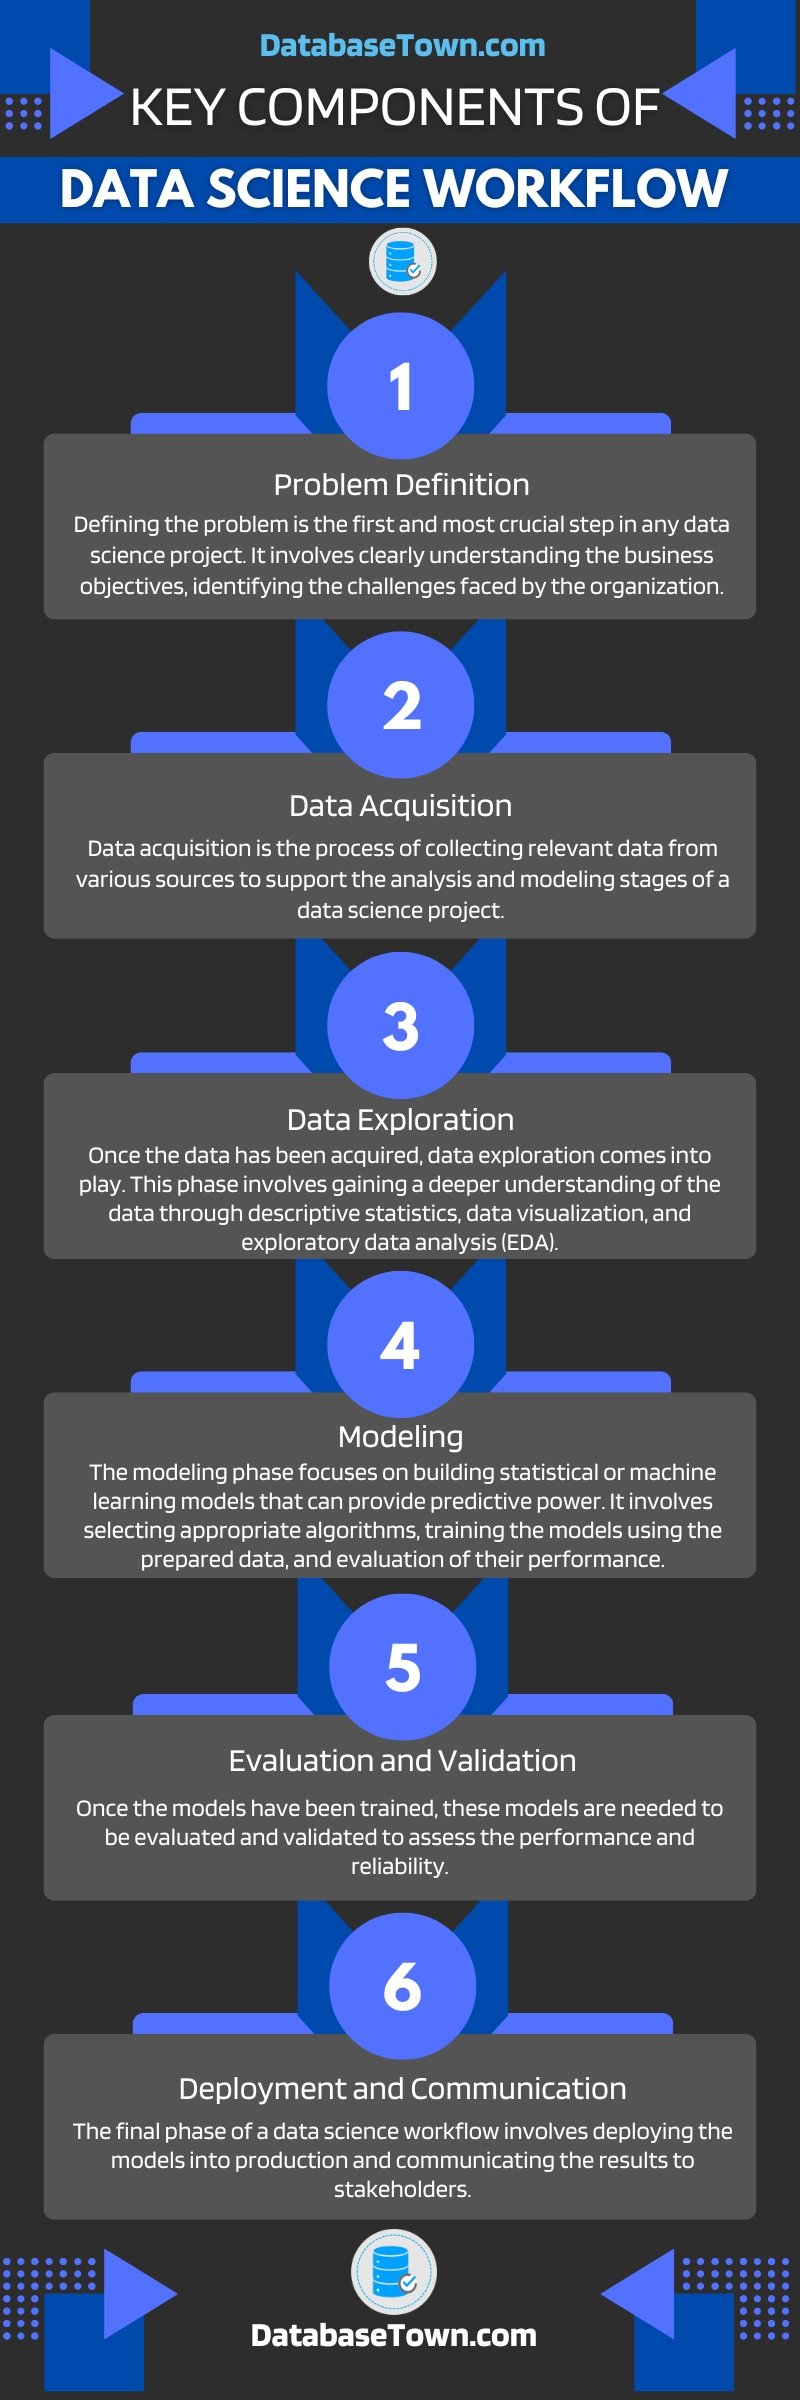 Key Components of a Data Science Workflow